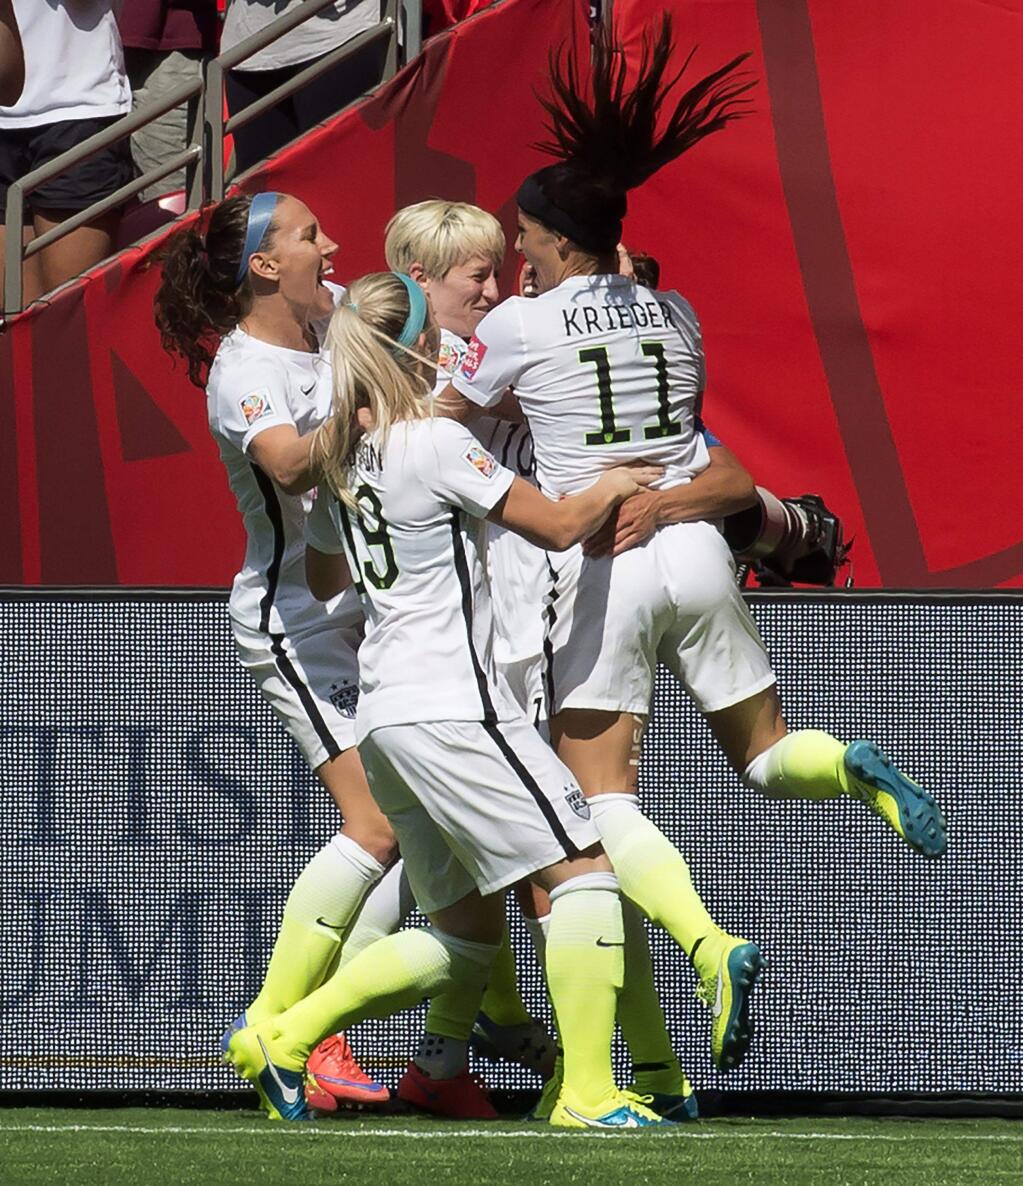 The United States team celebrates Carli Lloyd's goal during the first half of the FIFA World Cup soccer championship against Japan in Vancouver, British Columbia, Canada, Sunday, July 5, 2015. (Jonathan Hayward/The Canadian Press via AP) MANDATORY CREDIT